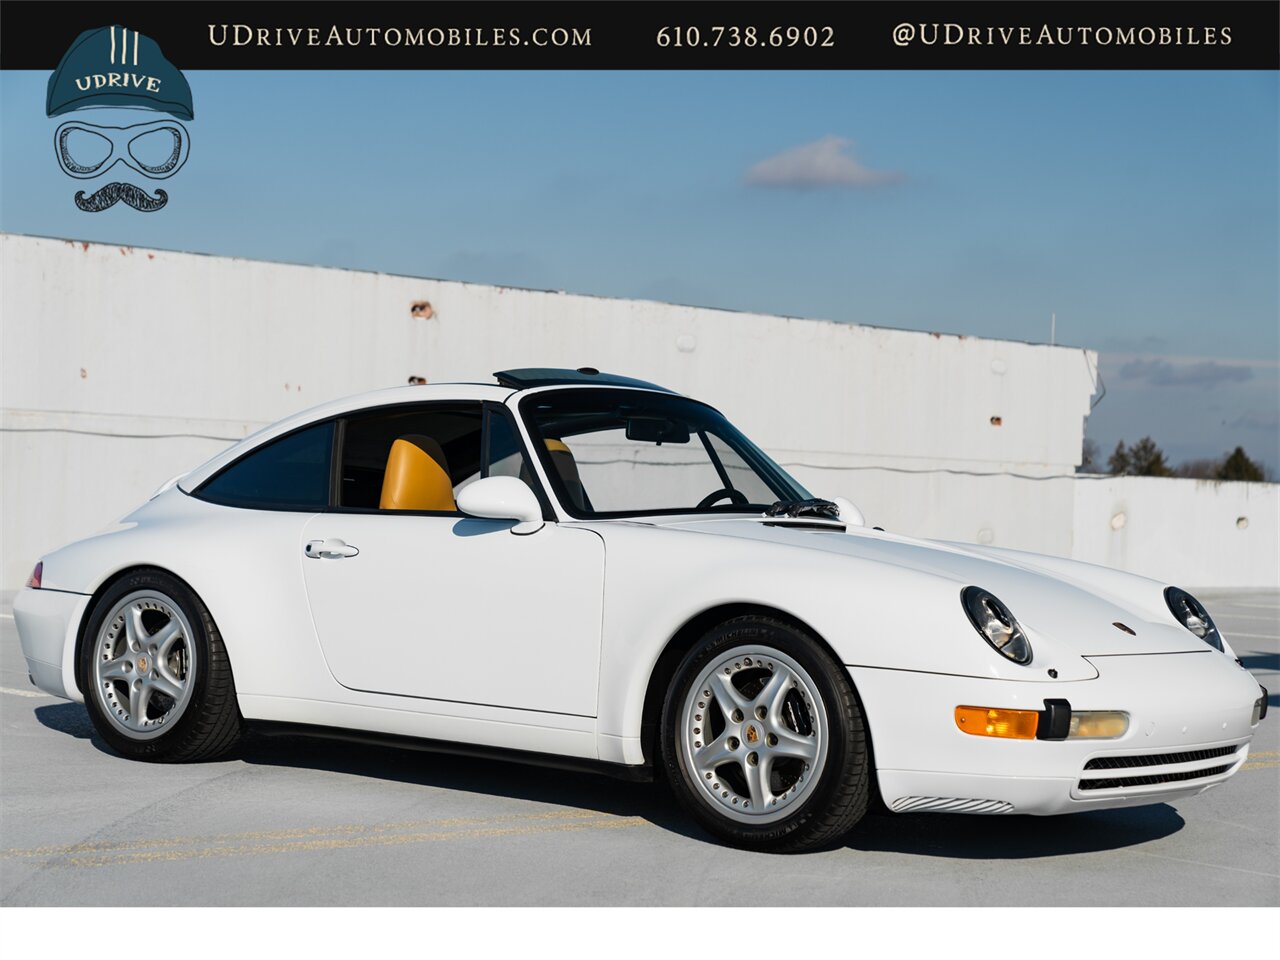 1998 Porsche 911 Carrera 993 Targa  1 of 122 Produced 6 Speed $10k Recent Service Engine Reseal - Photo 15 - West Chester, PA 19382